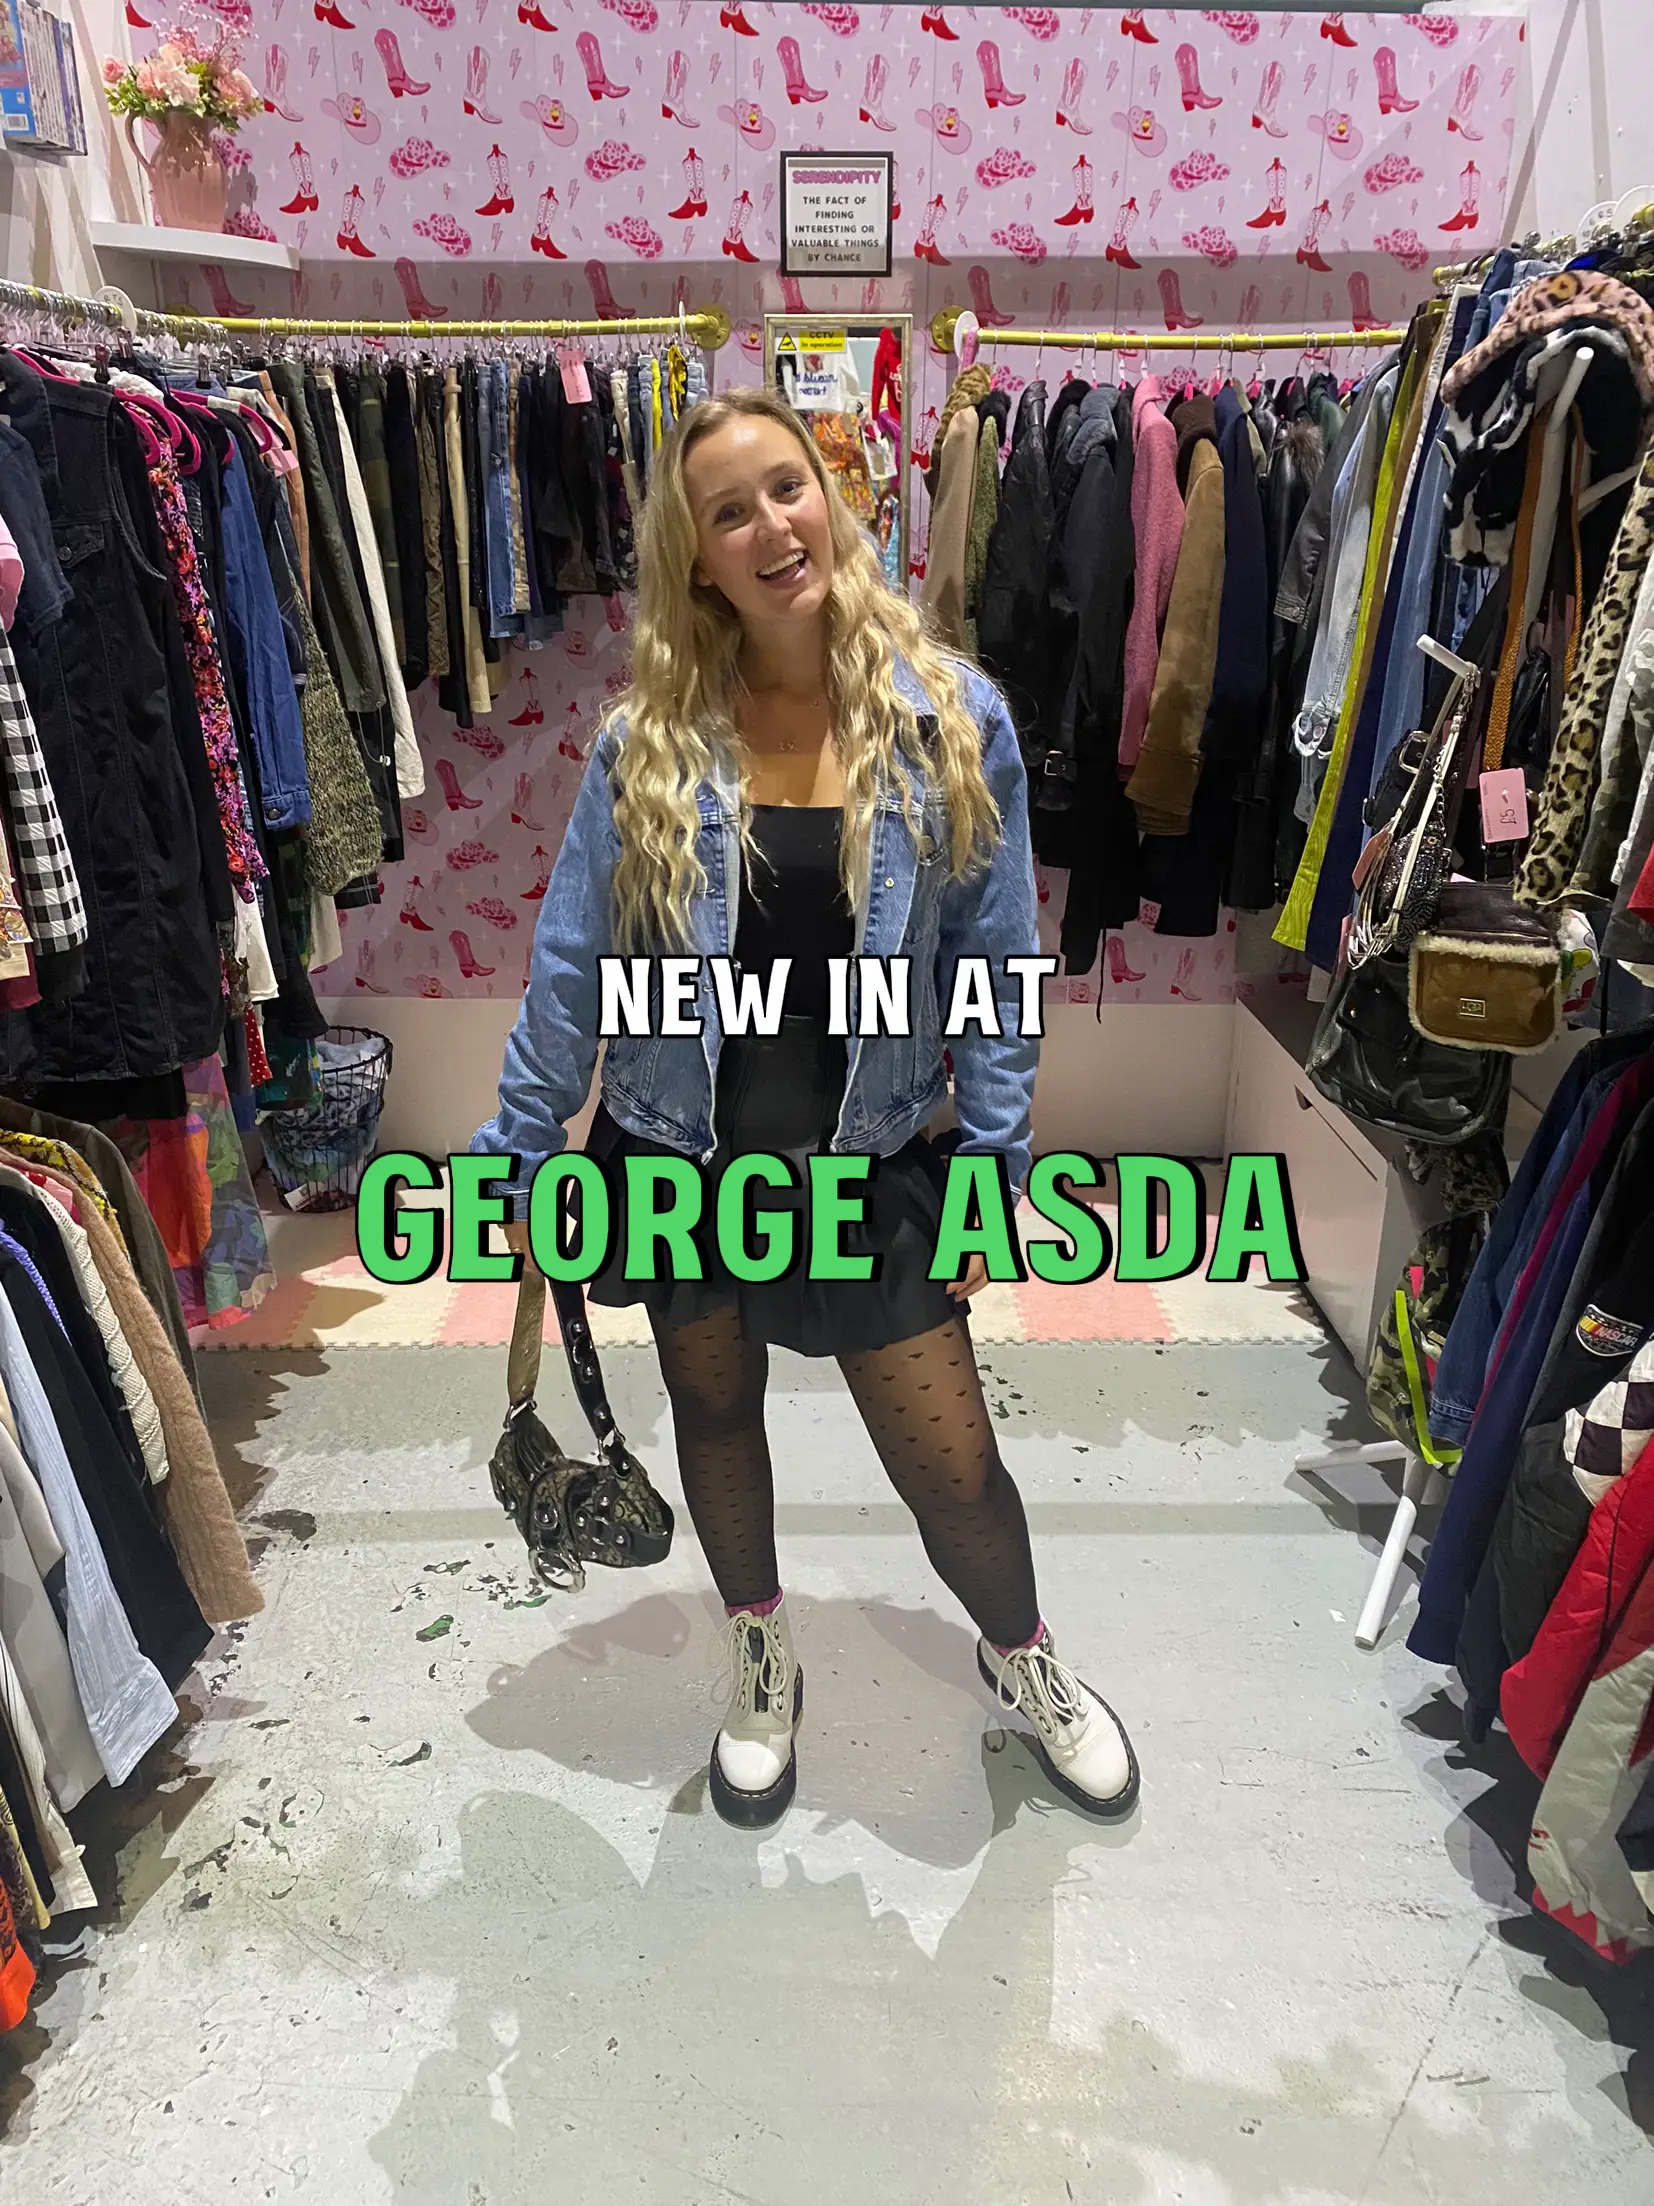 George at Asda shoppers 'obsessed' with mini t-shirt dresses that